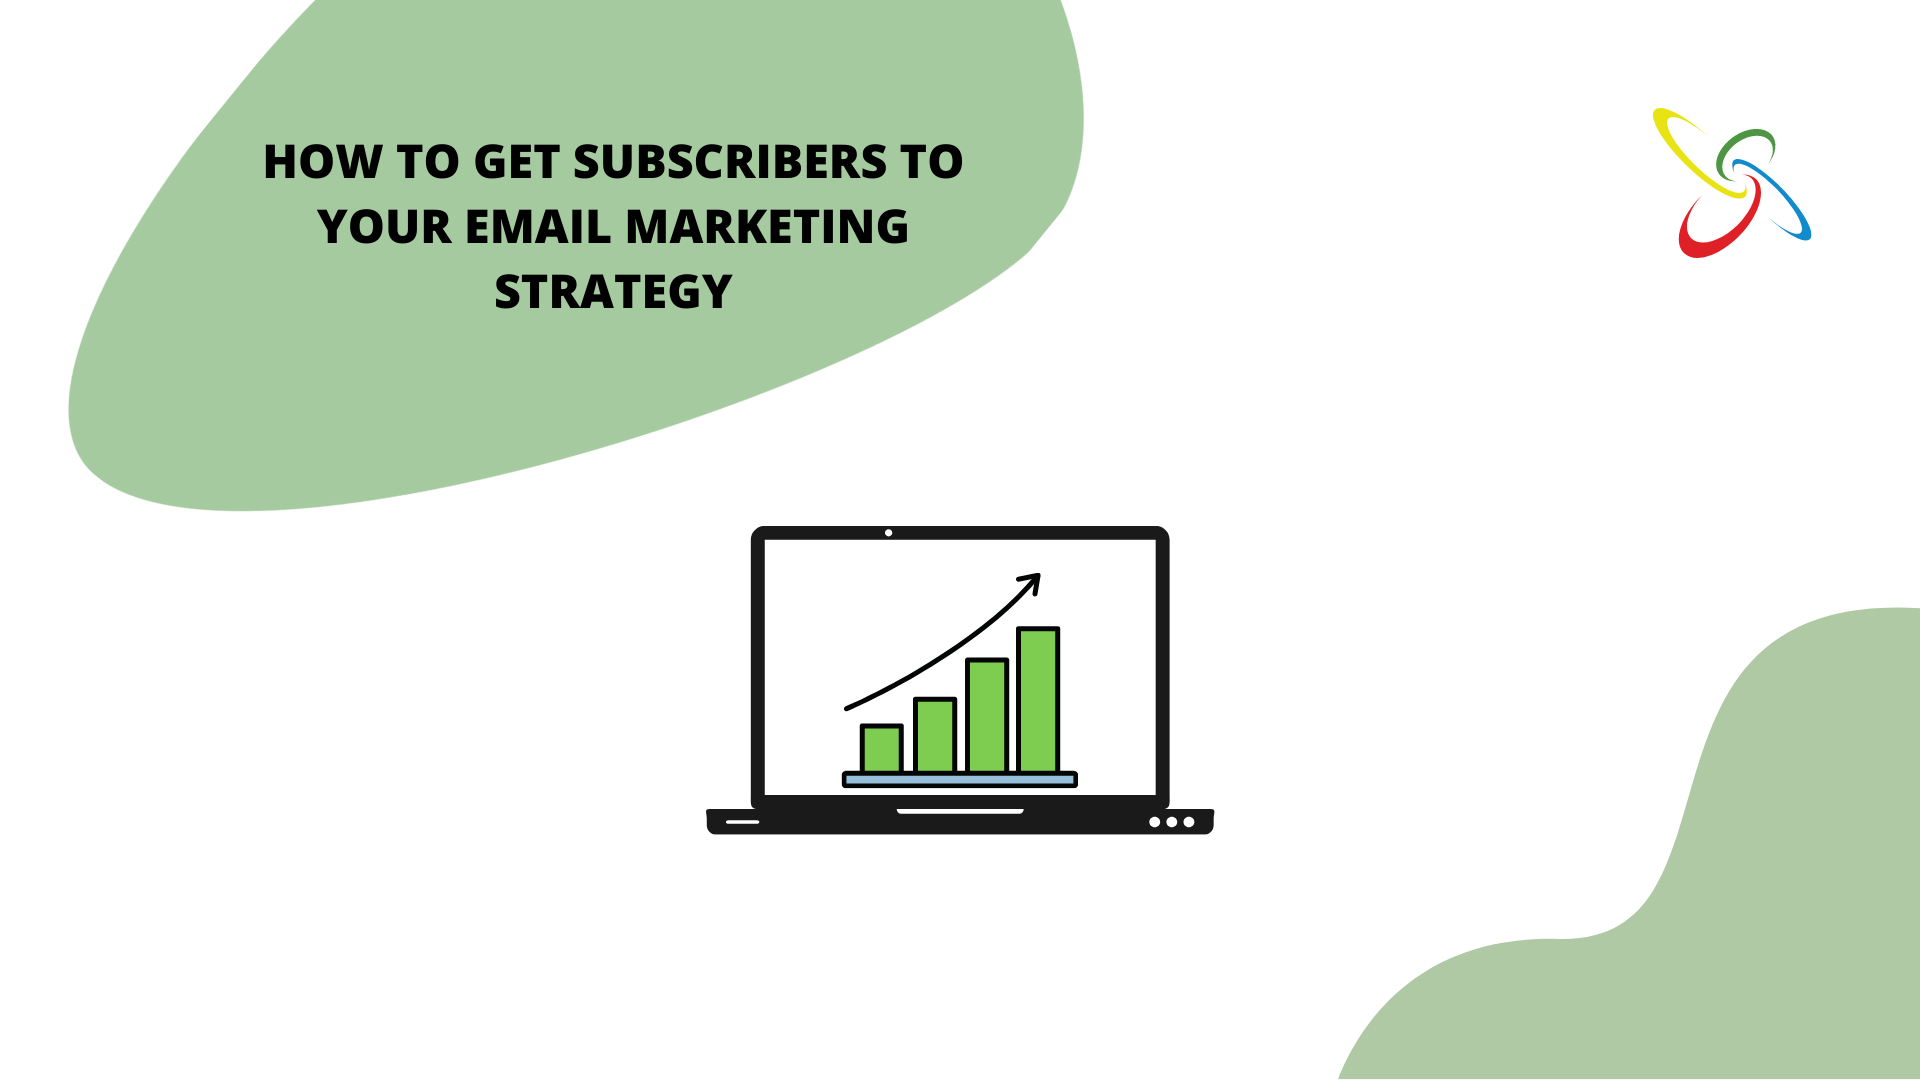 How to get subscribers to your email marketing strategy